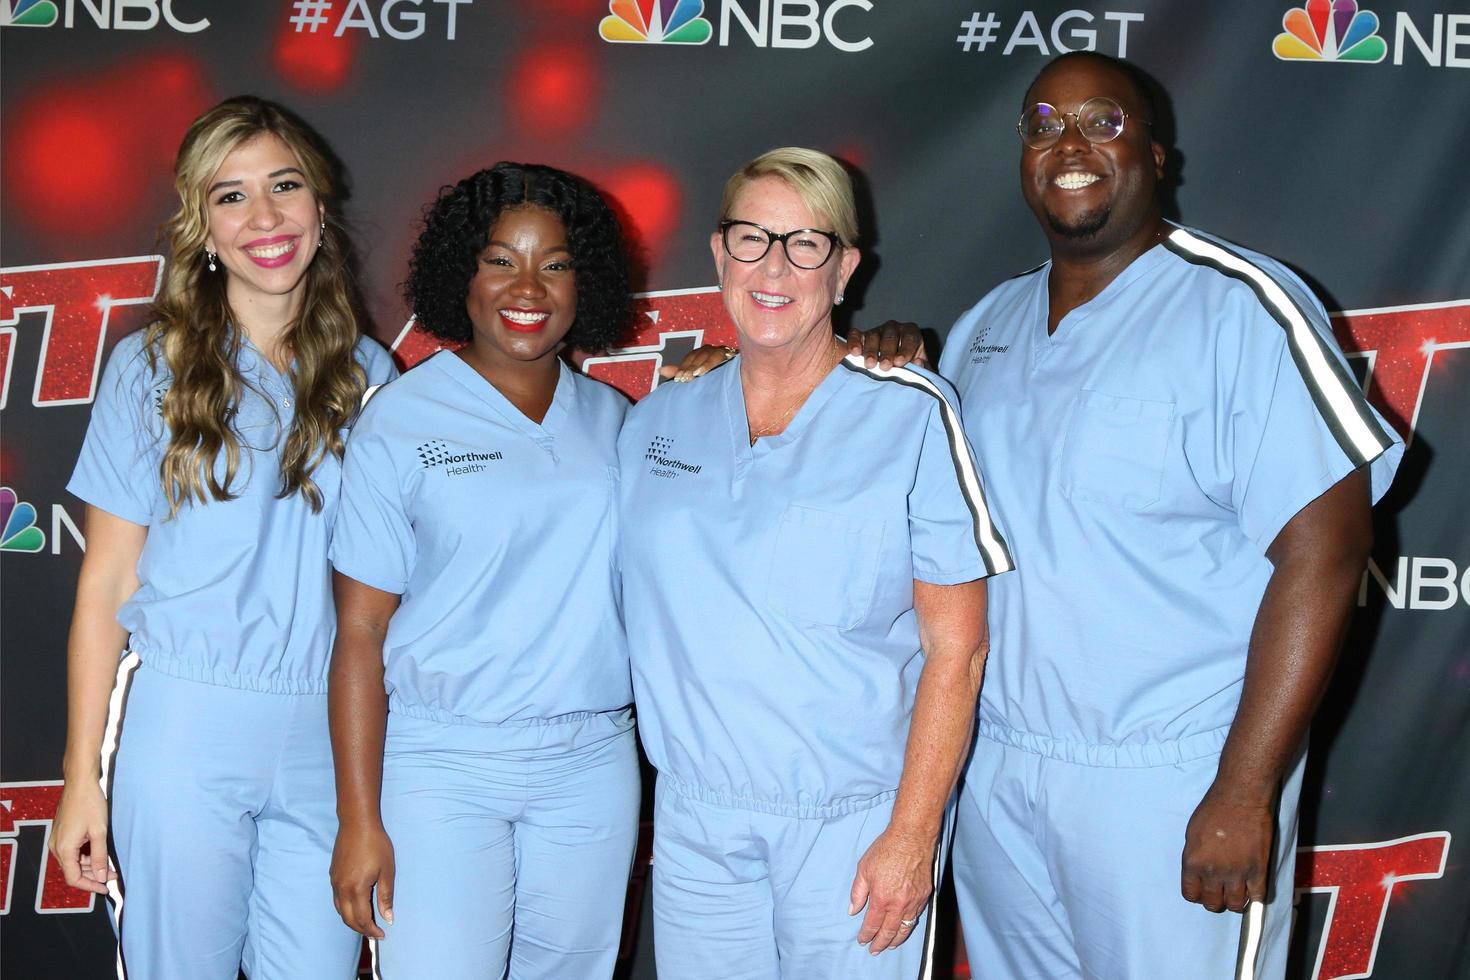 LOS ANGELES  SEP 7 - Members of the Northwell Health Nurse Choir at the America s Got Talent Live Show Red Carpet at the Dolby Theater on September 7, 2021 in Los Angeles, CA photo